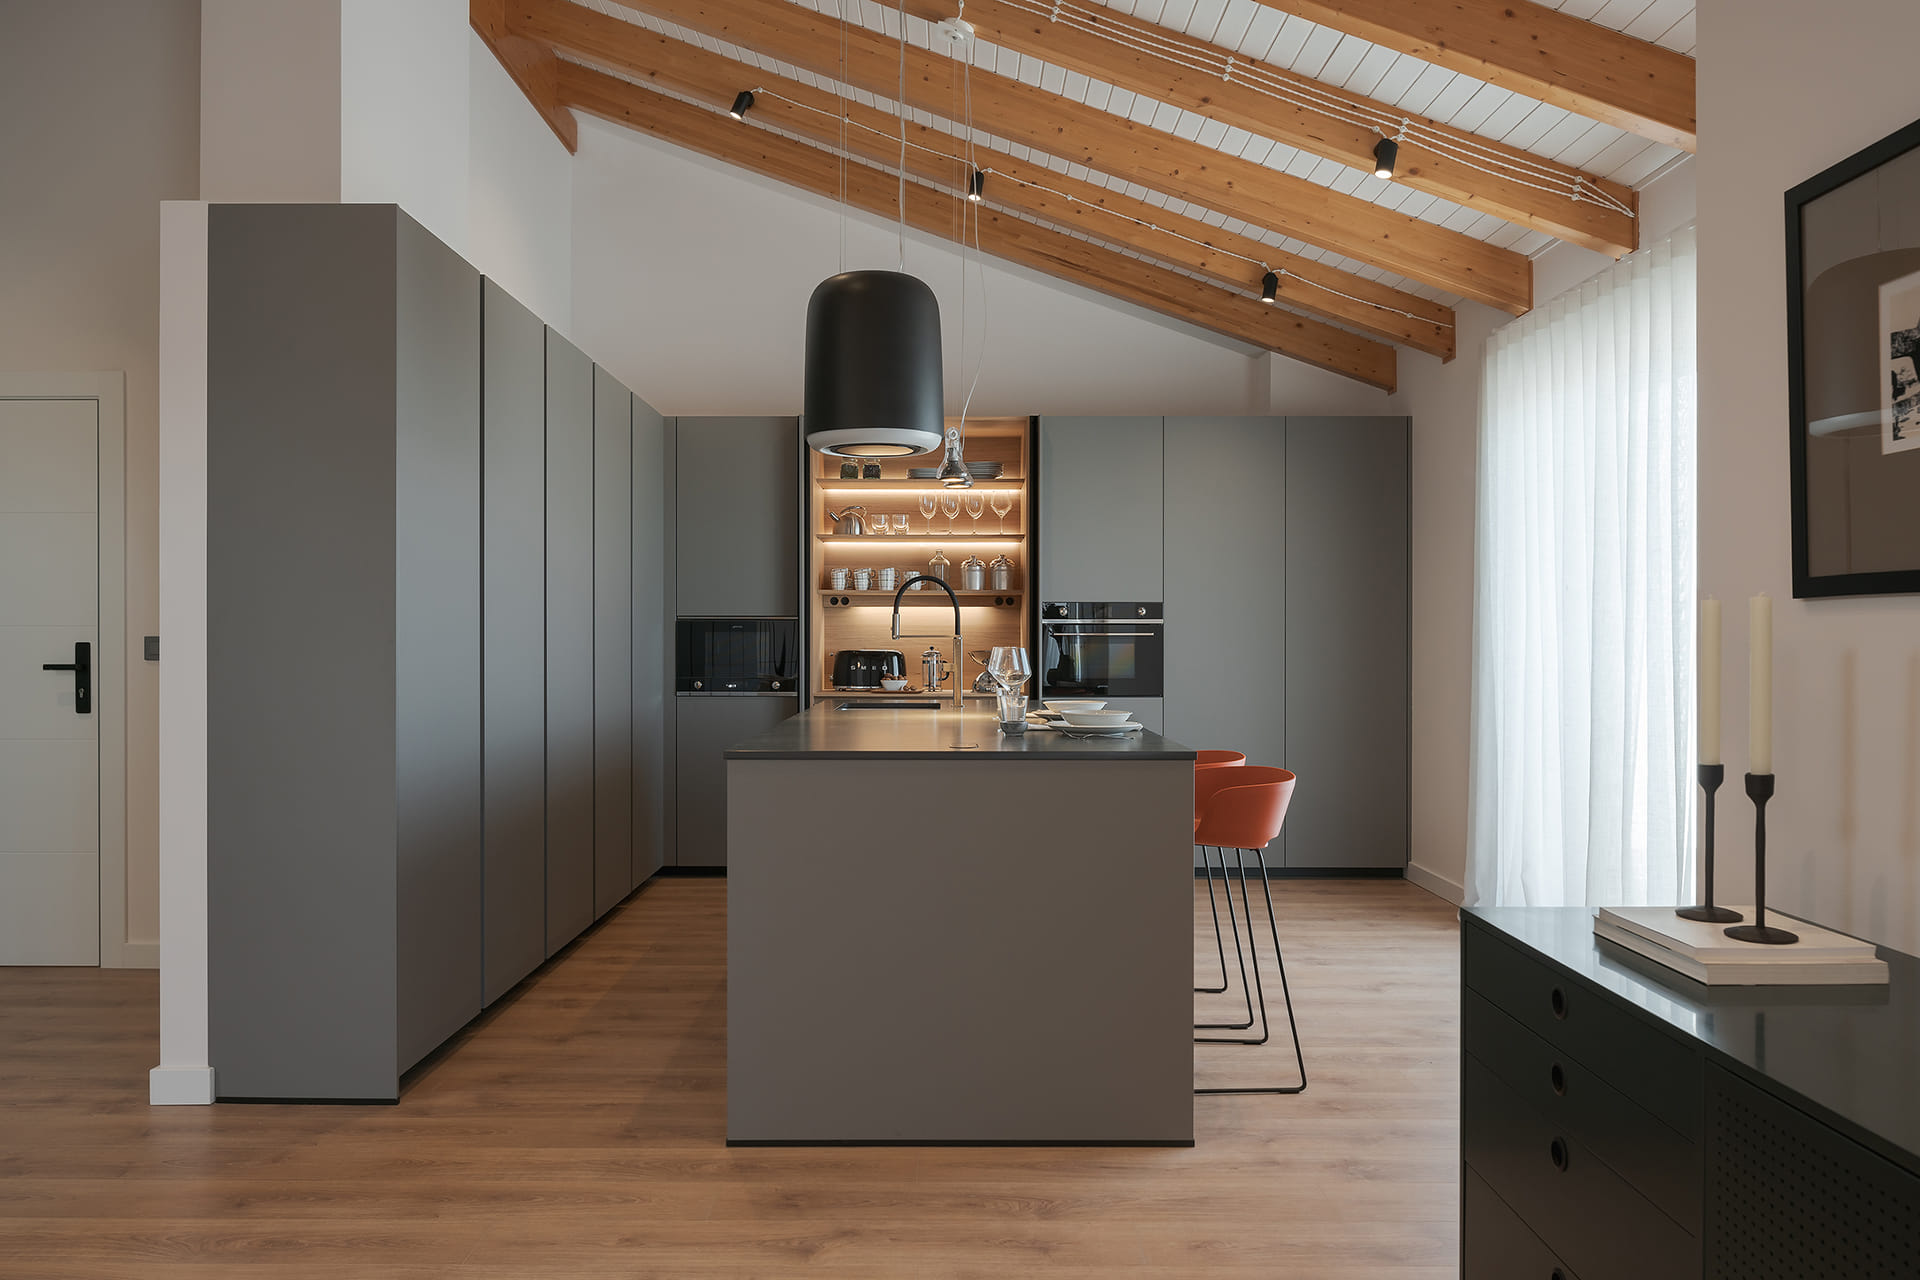 Grey kitchen with island and wood flooring, design open to the lounge.